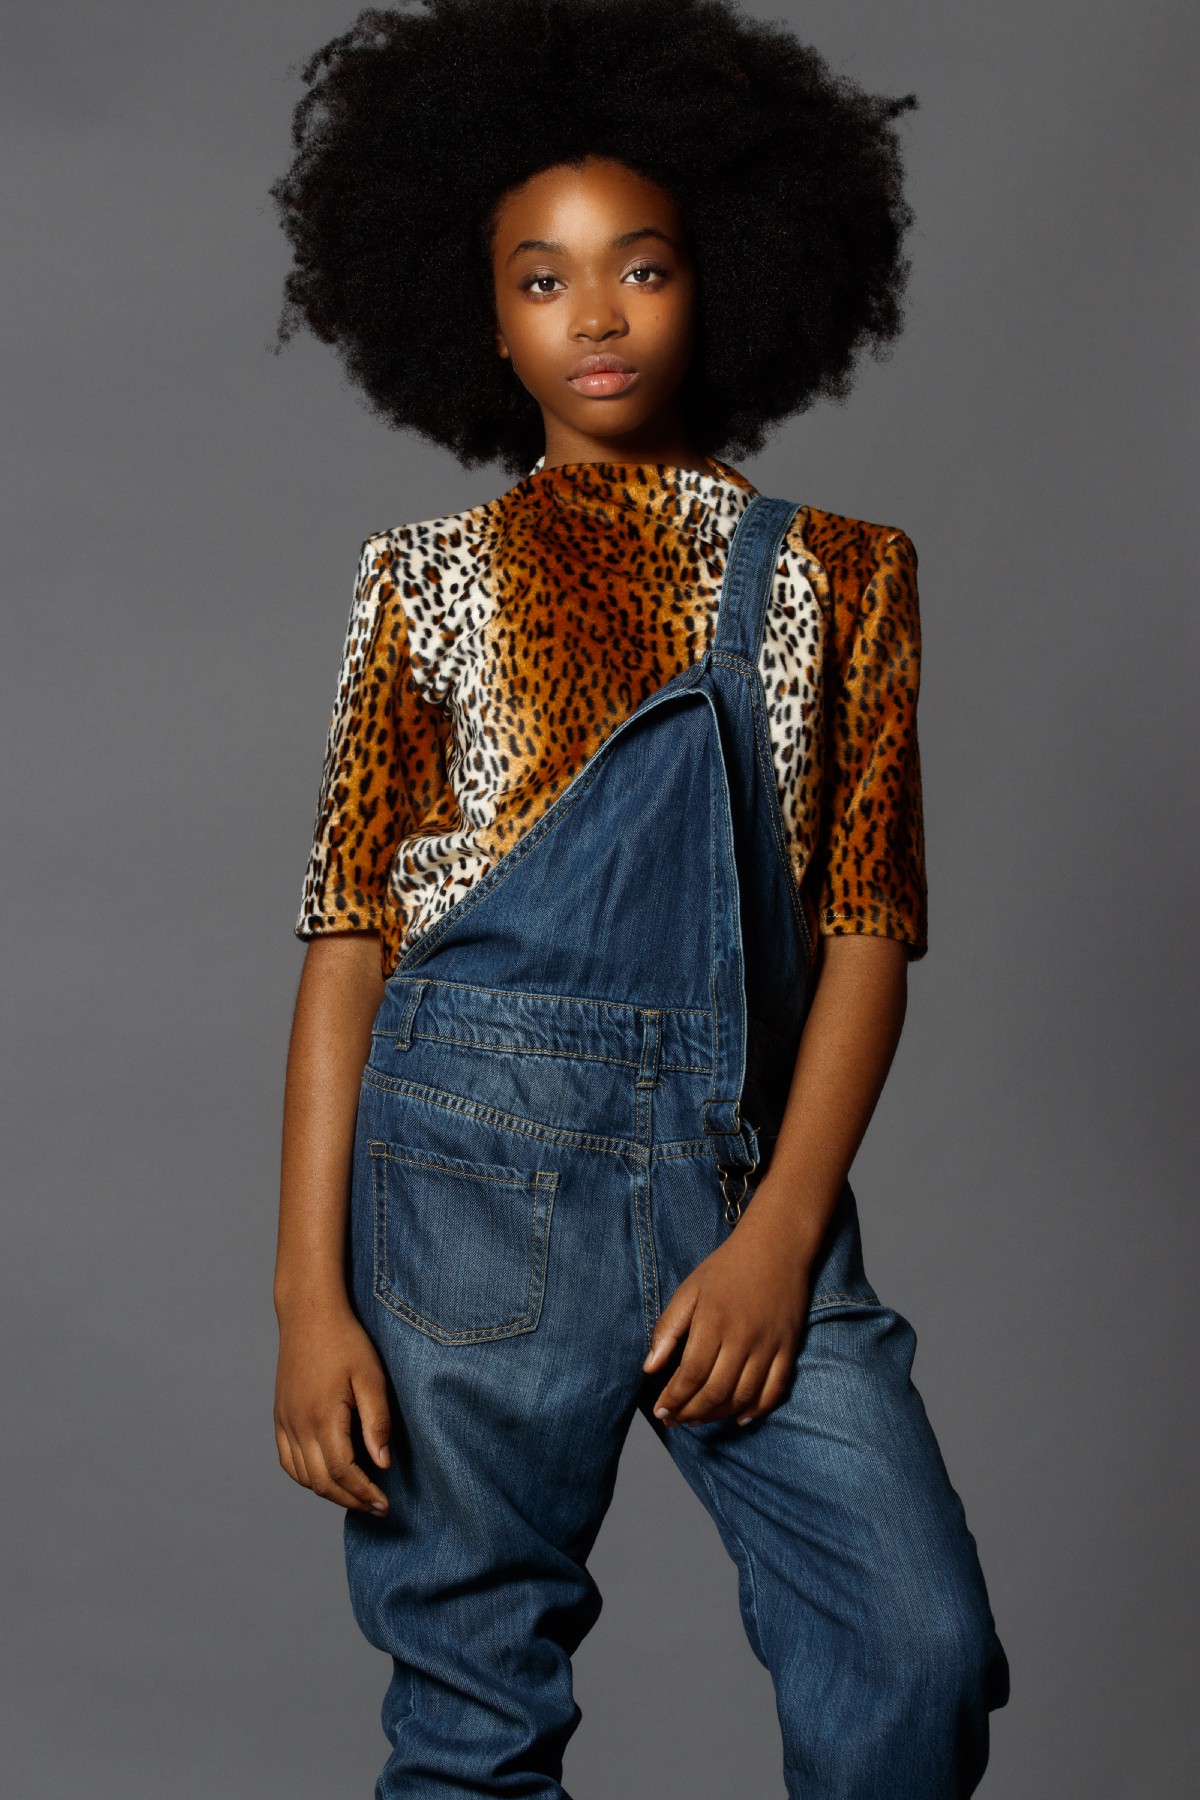 Celai West 12 years old Fashion Professional Model & Activist